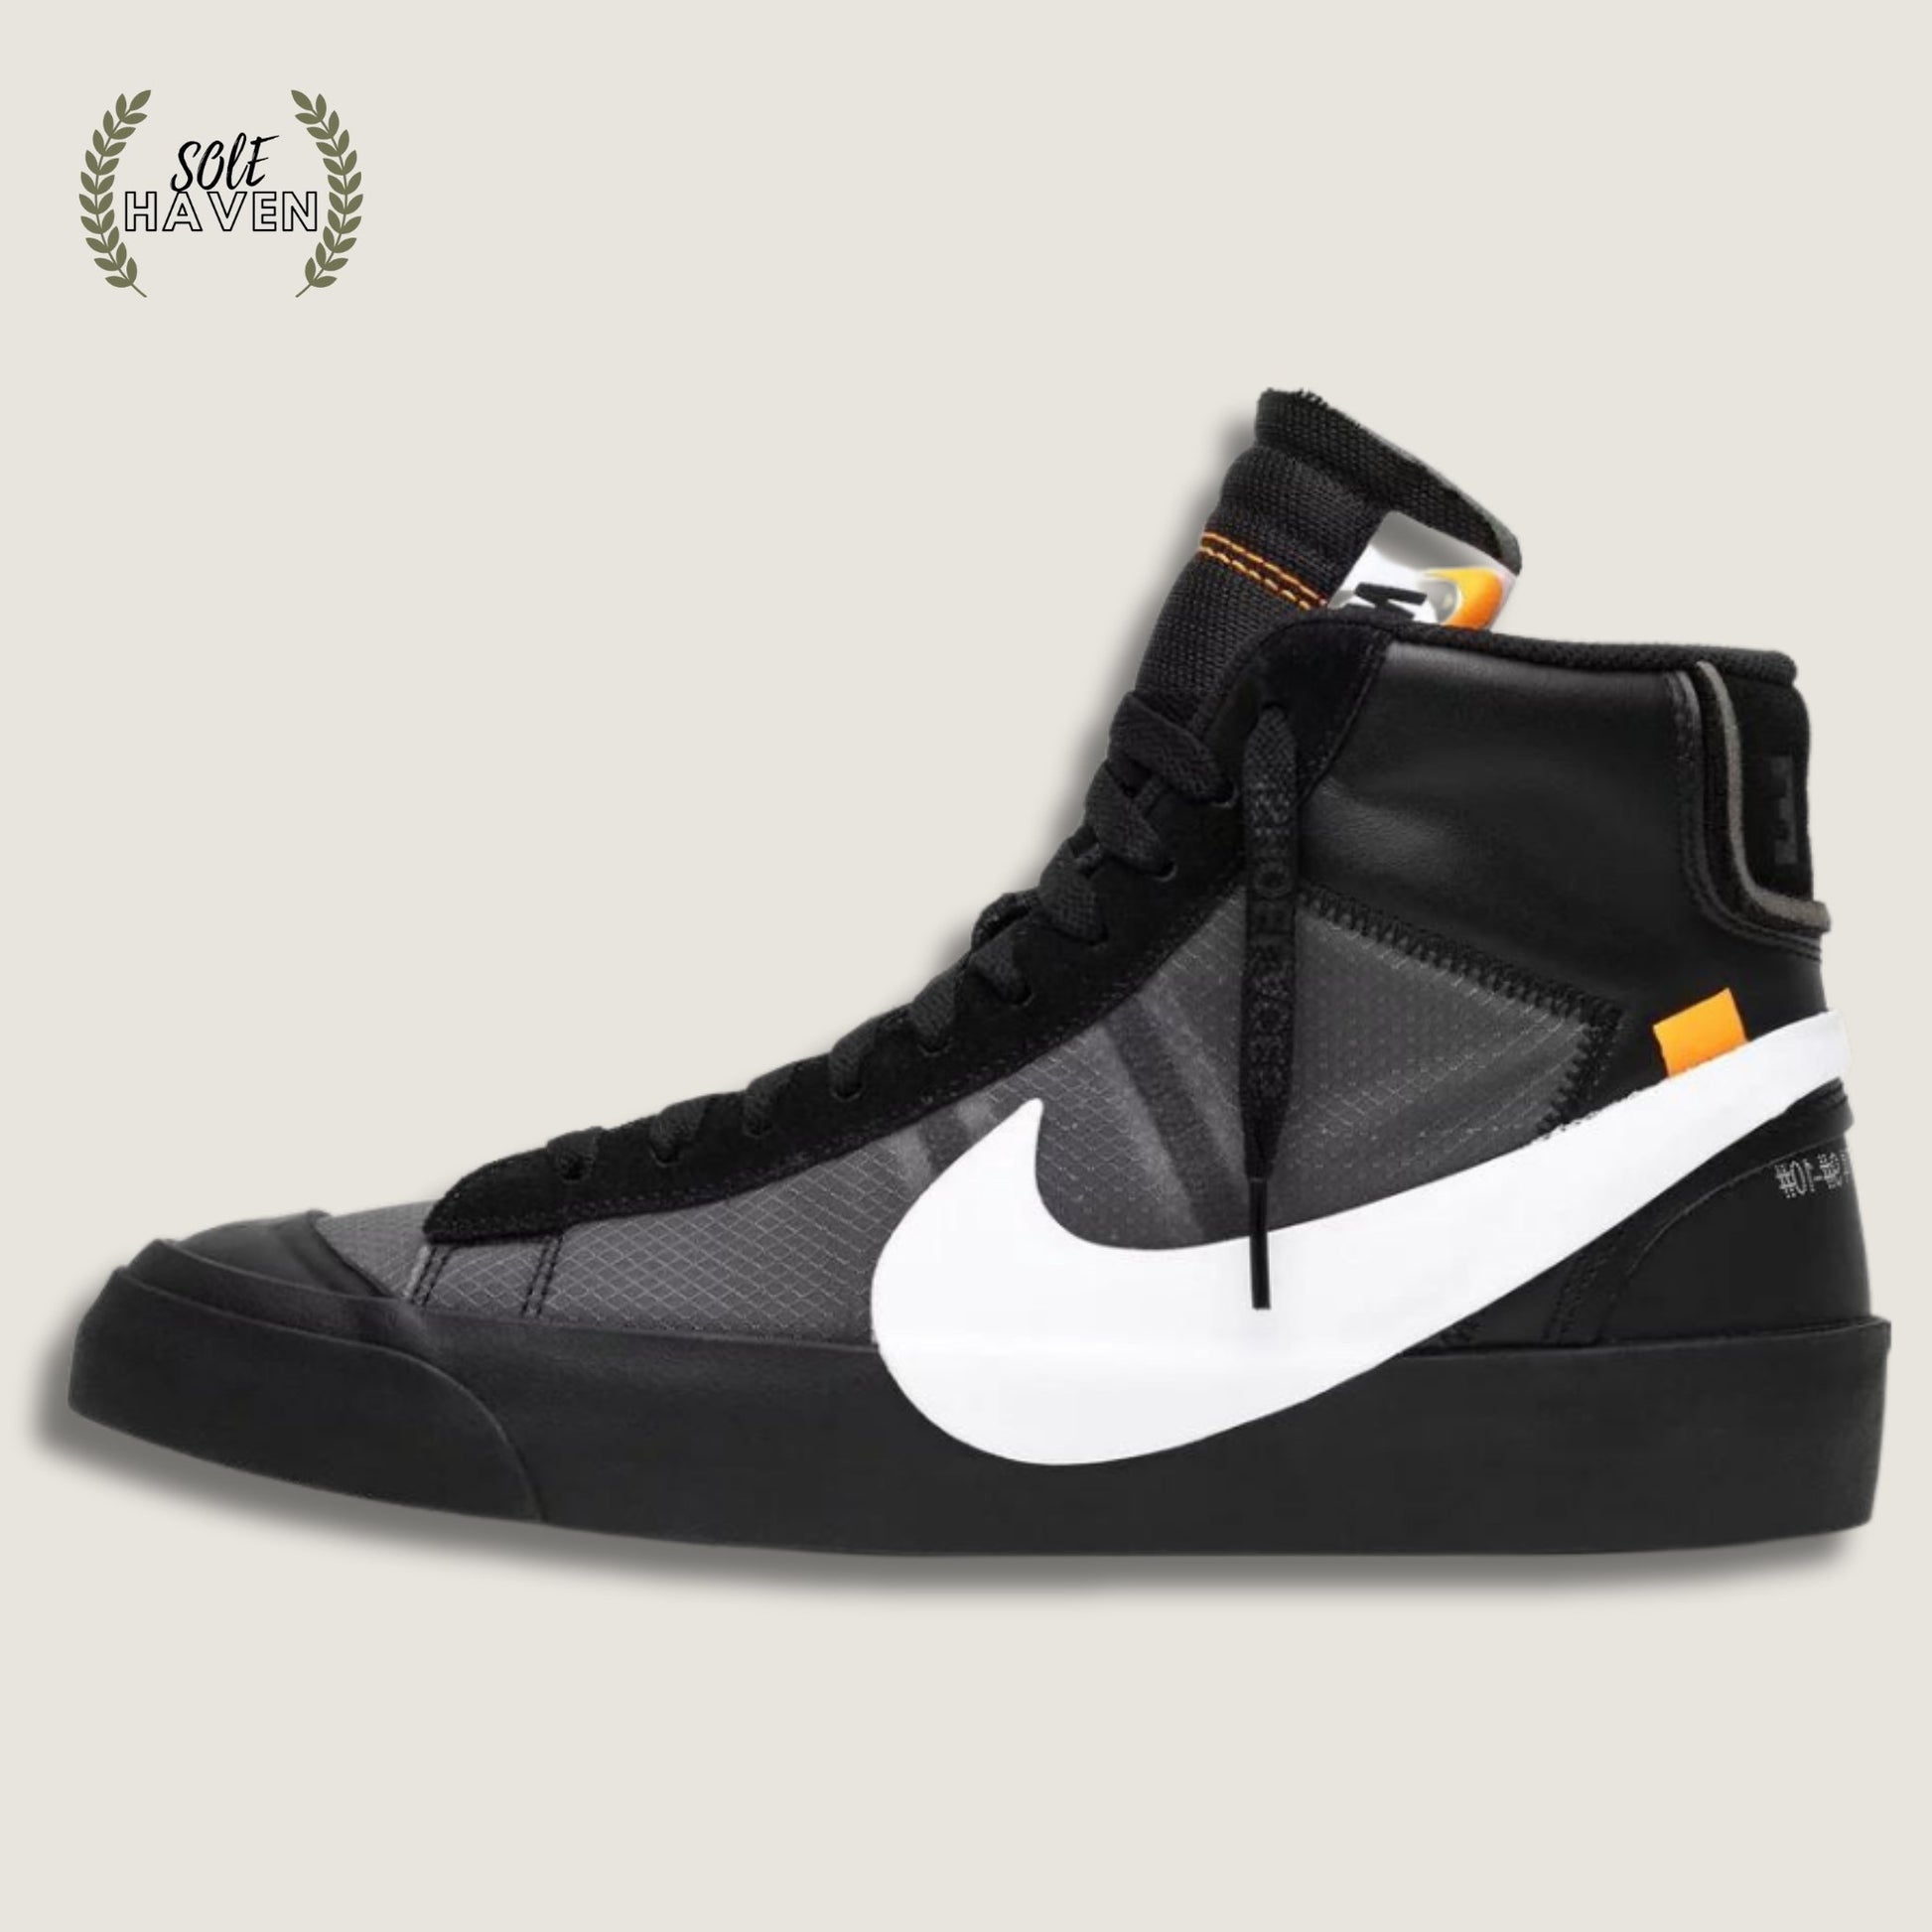 Off-White x Blazer Mid 'Grim Reapers' - Sole HavenShoesNike